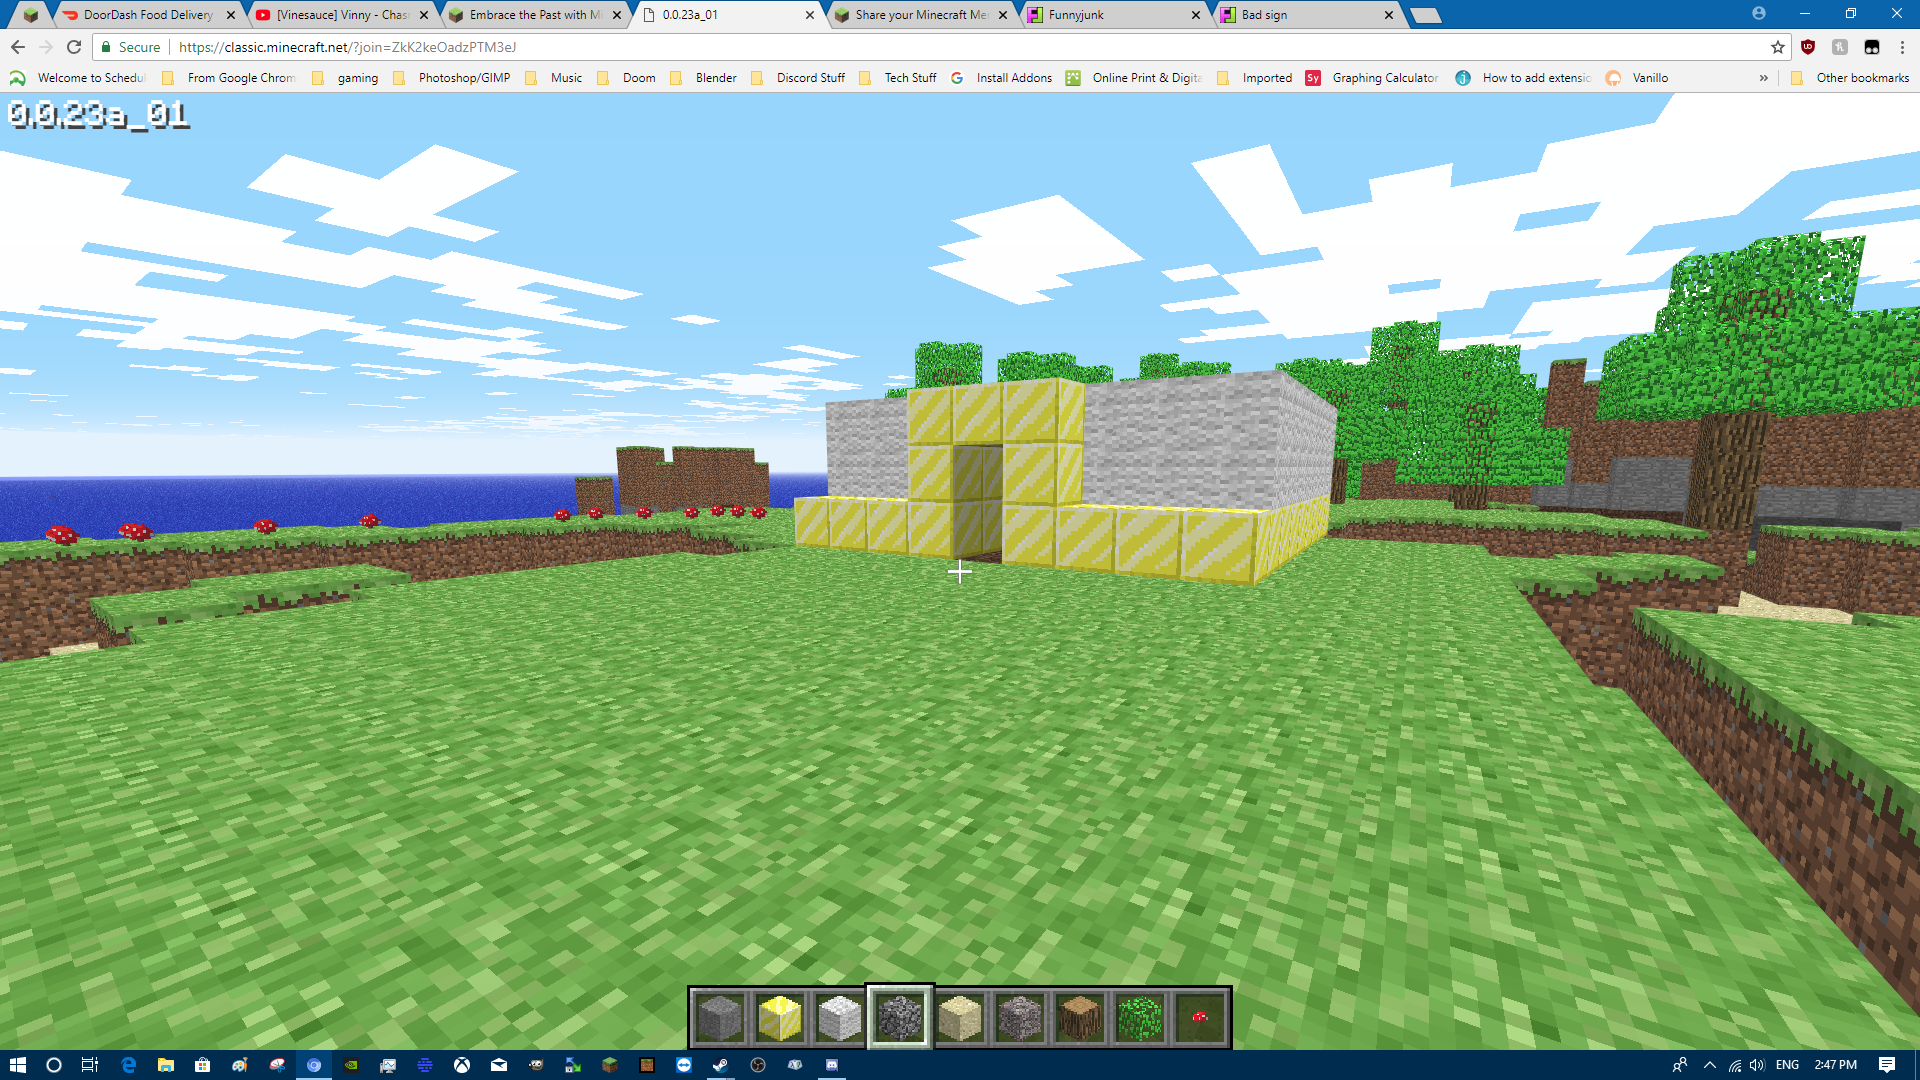 Minecraft Classic in your browser right now!, classic minecraft net join 